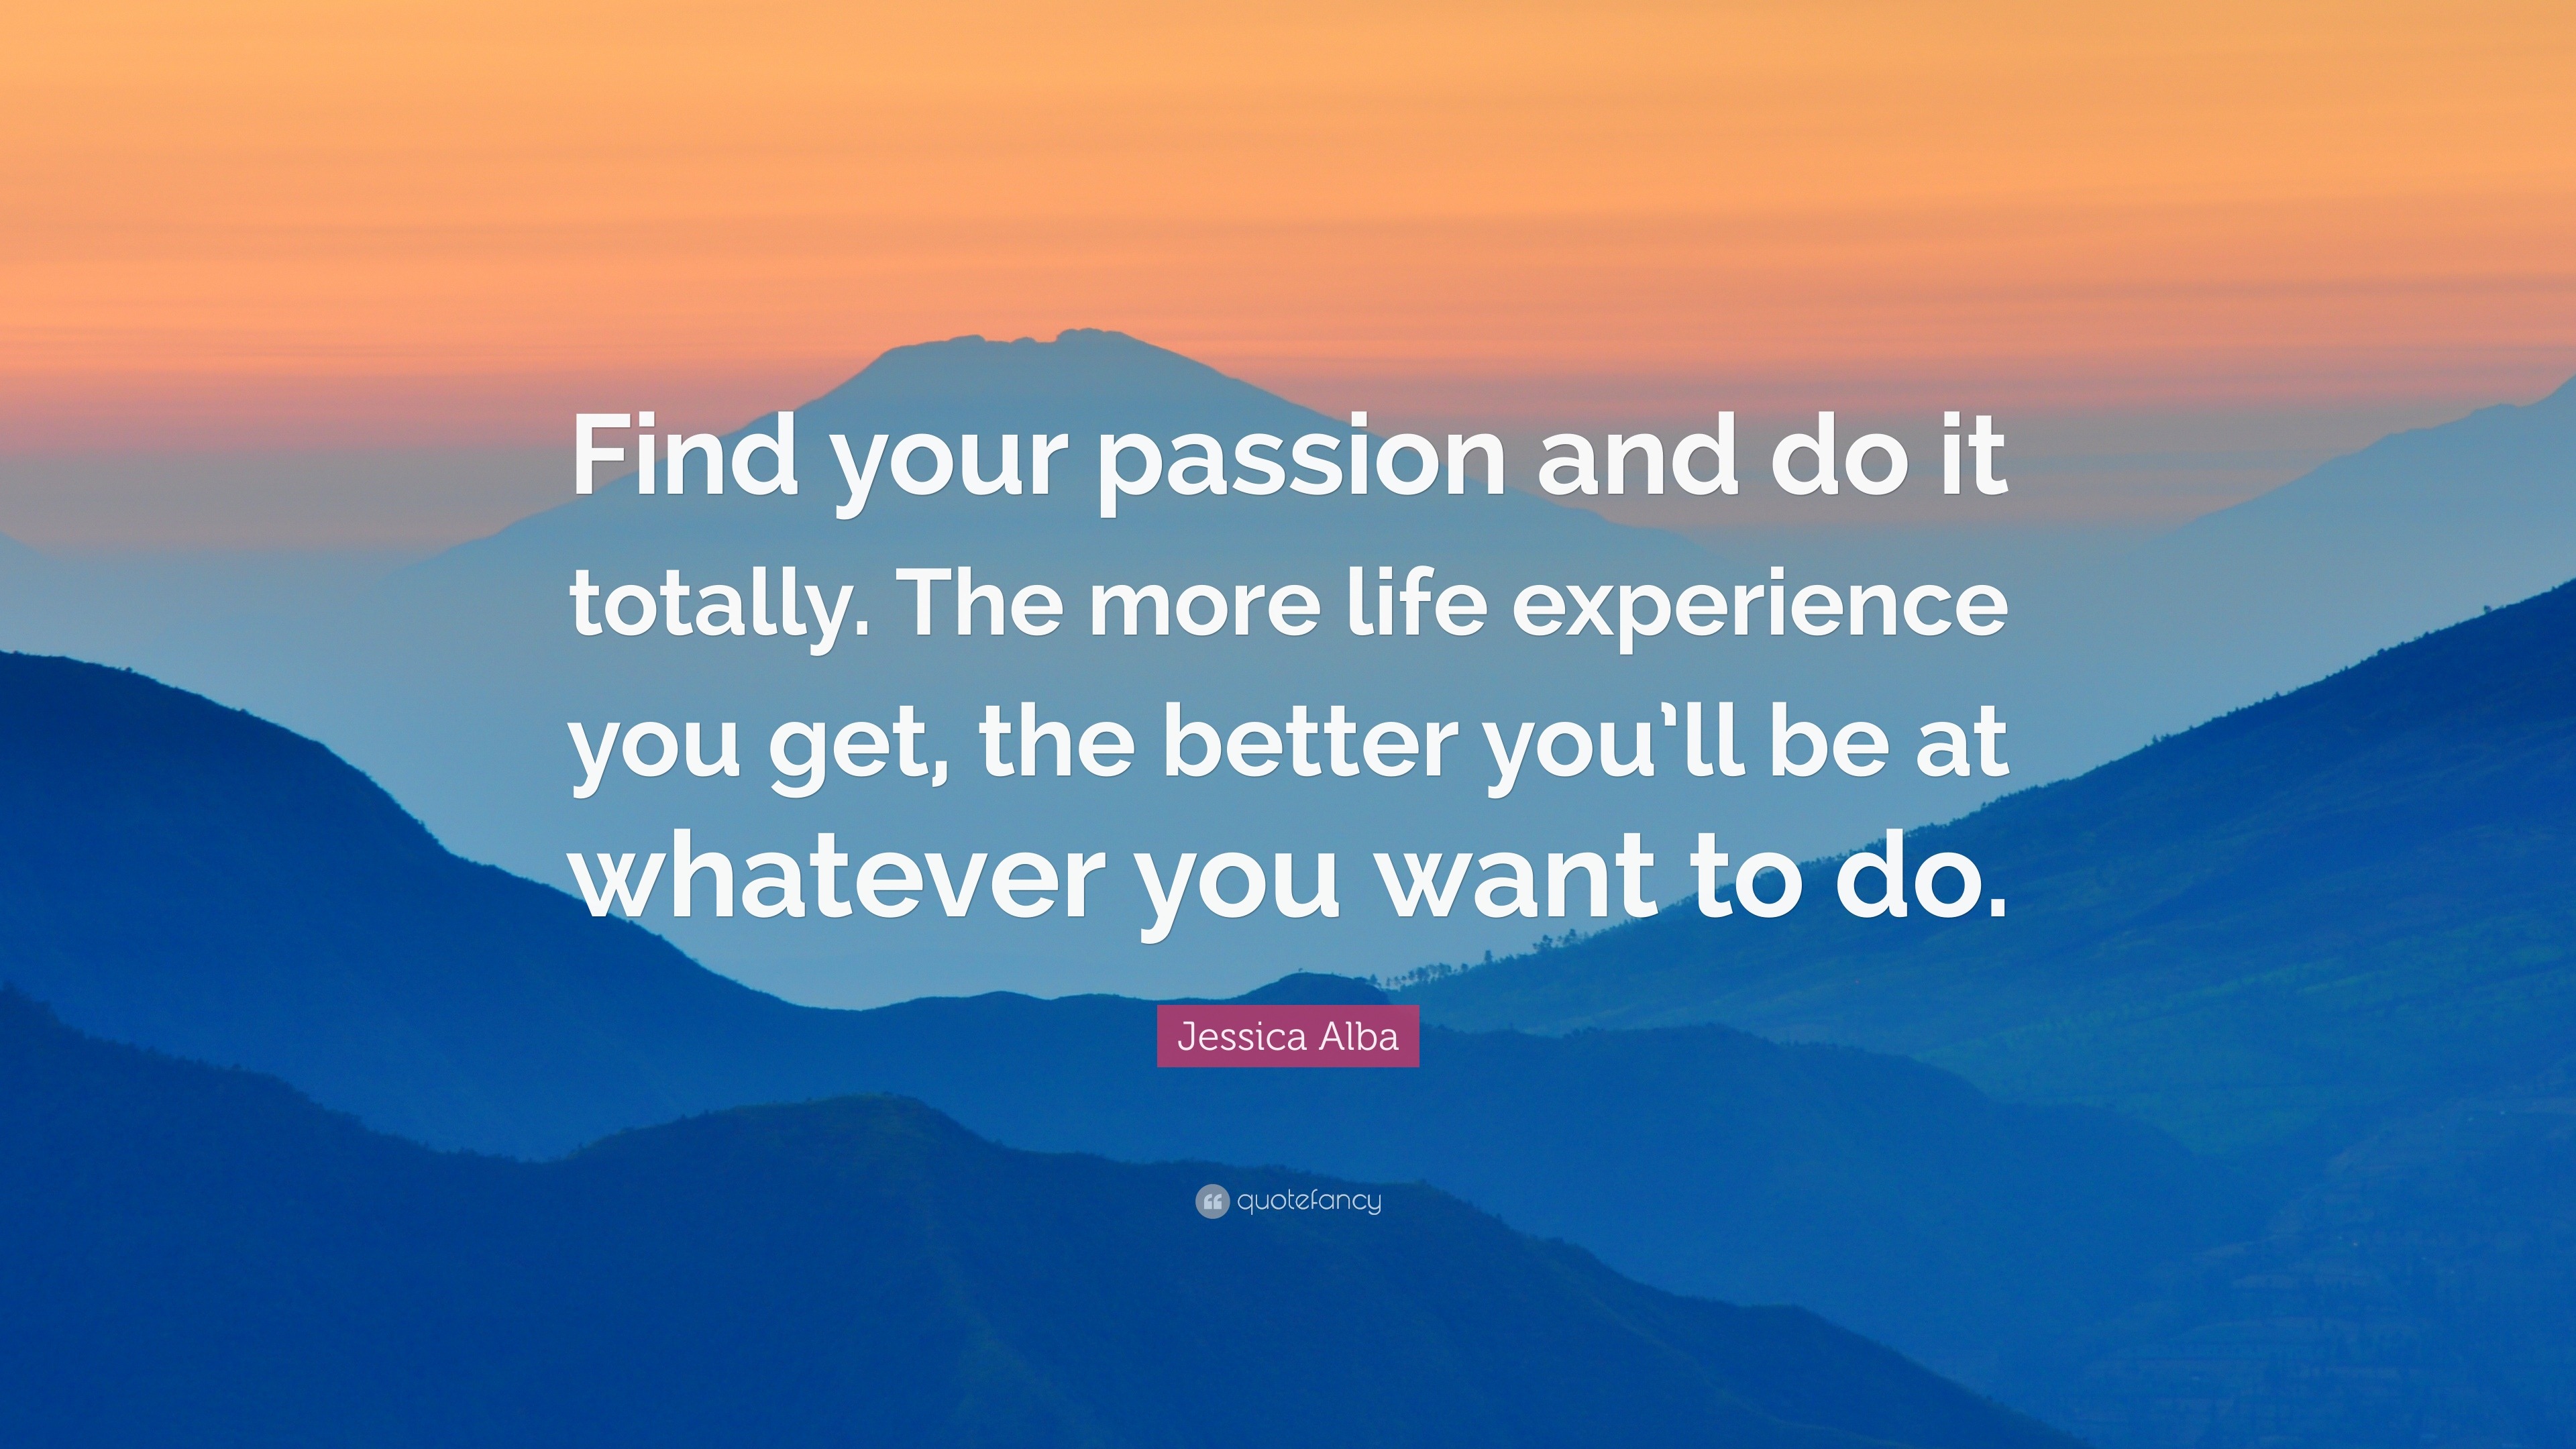 Jessica Alba Quote: “Find your passion and do it totally. The more life ...